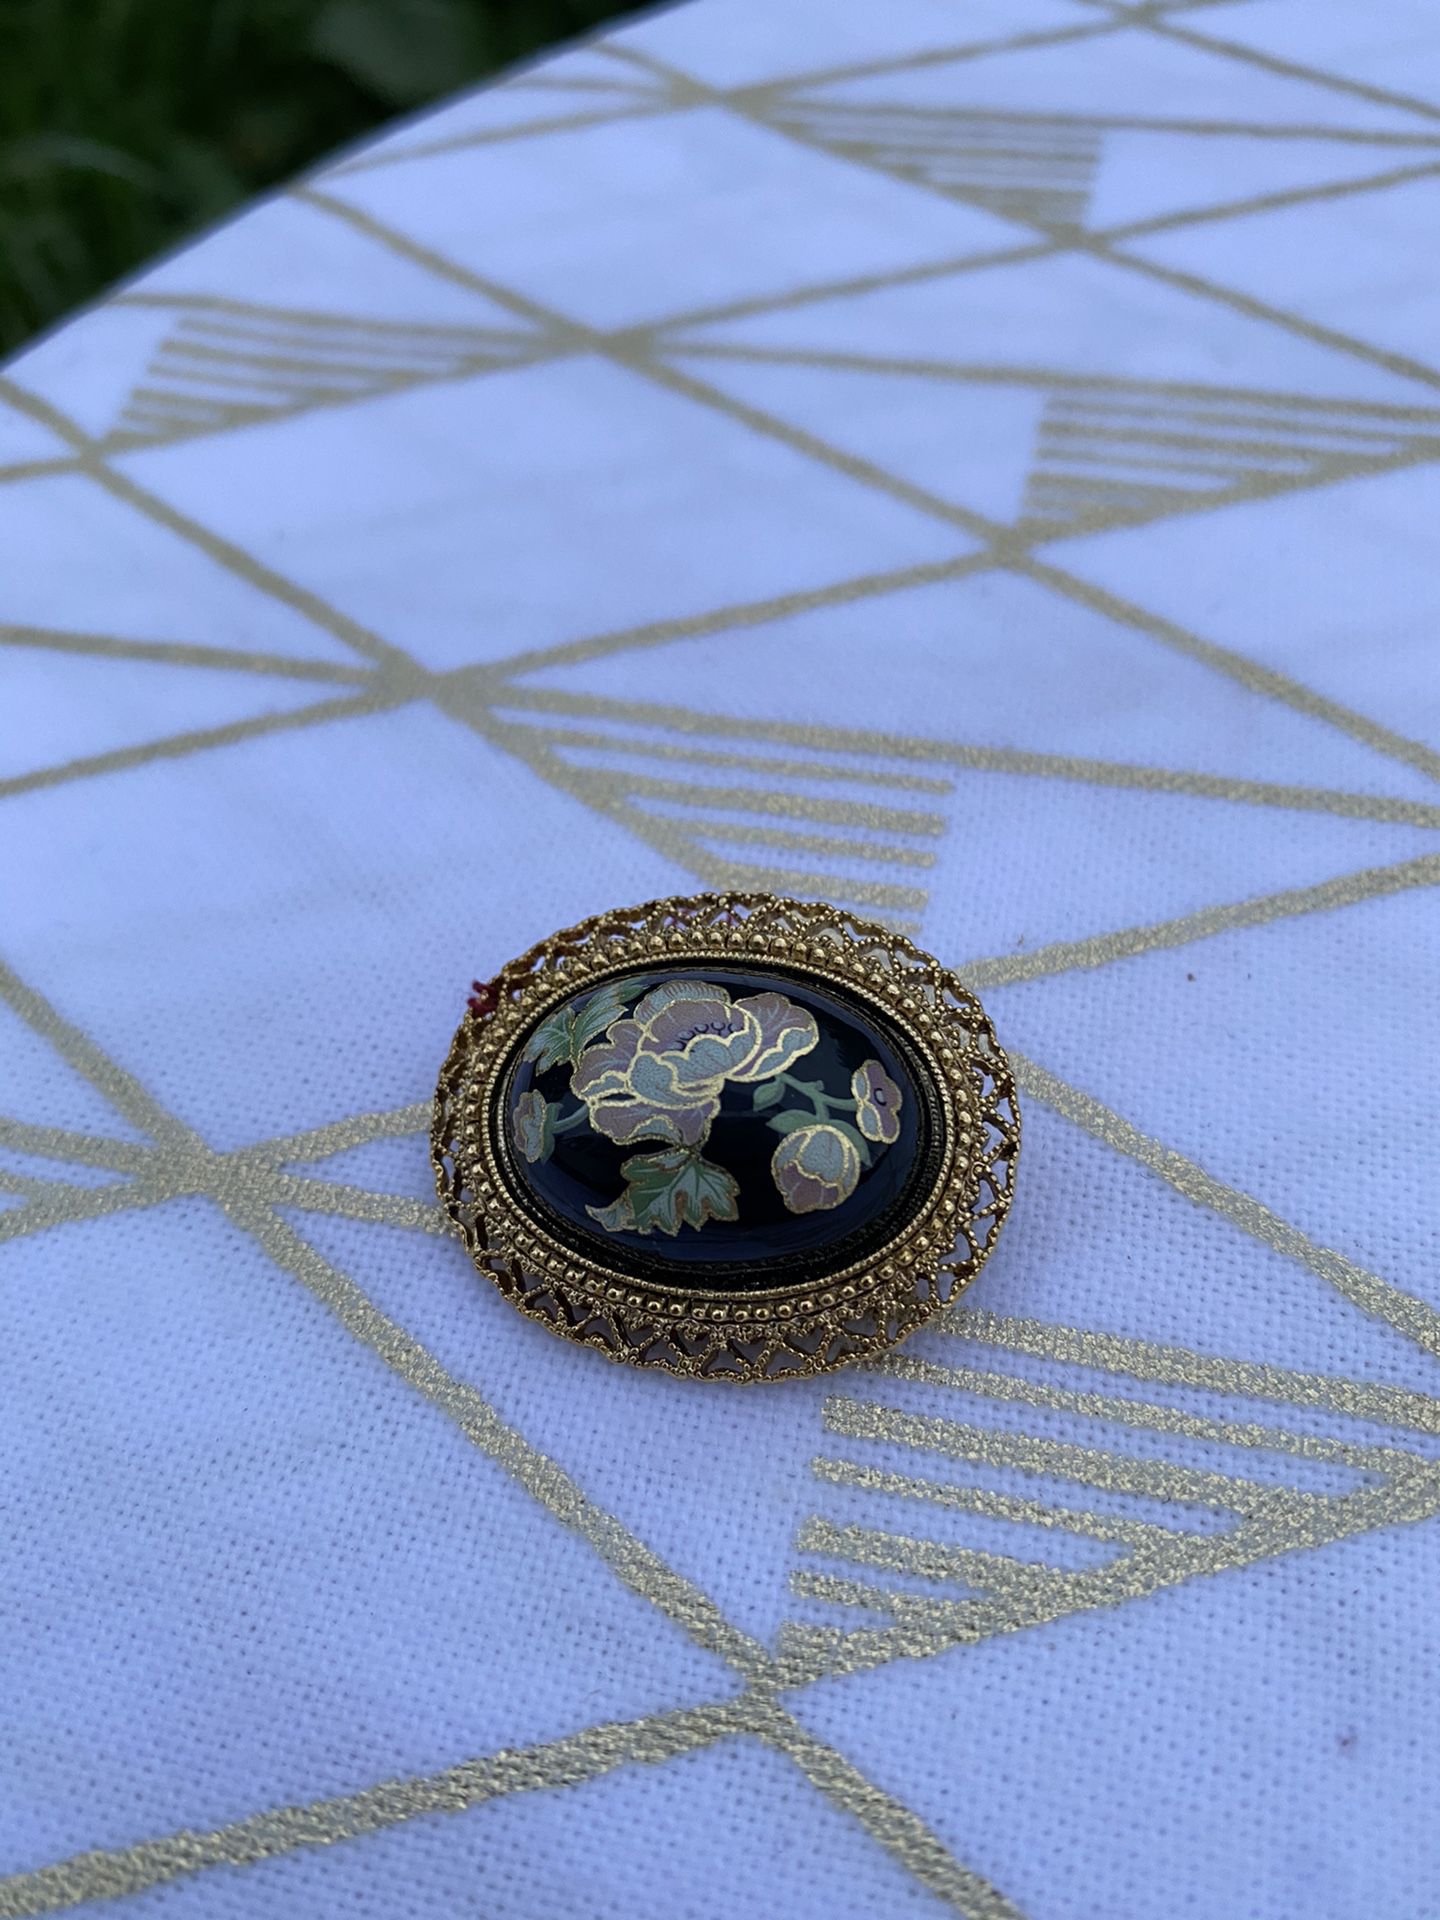 Vintage Brooch Pin with Floral Detail and Filigree Border on Black Background